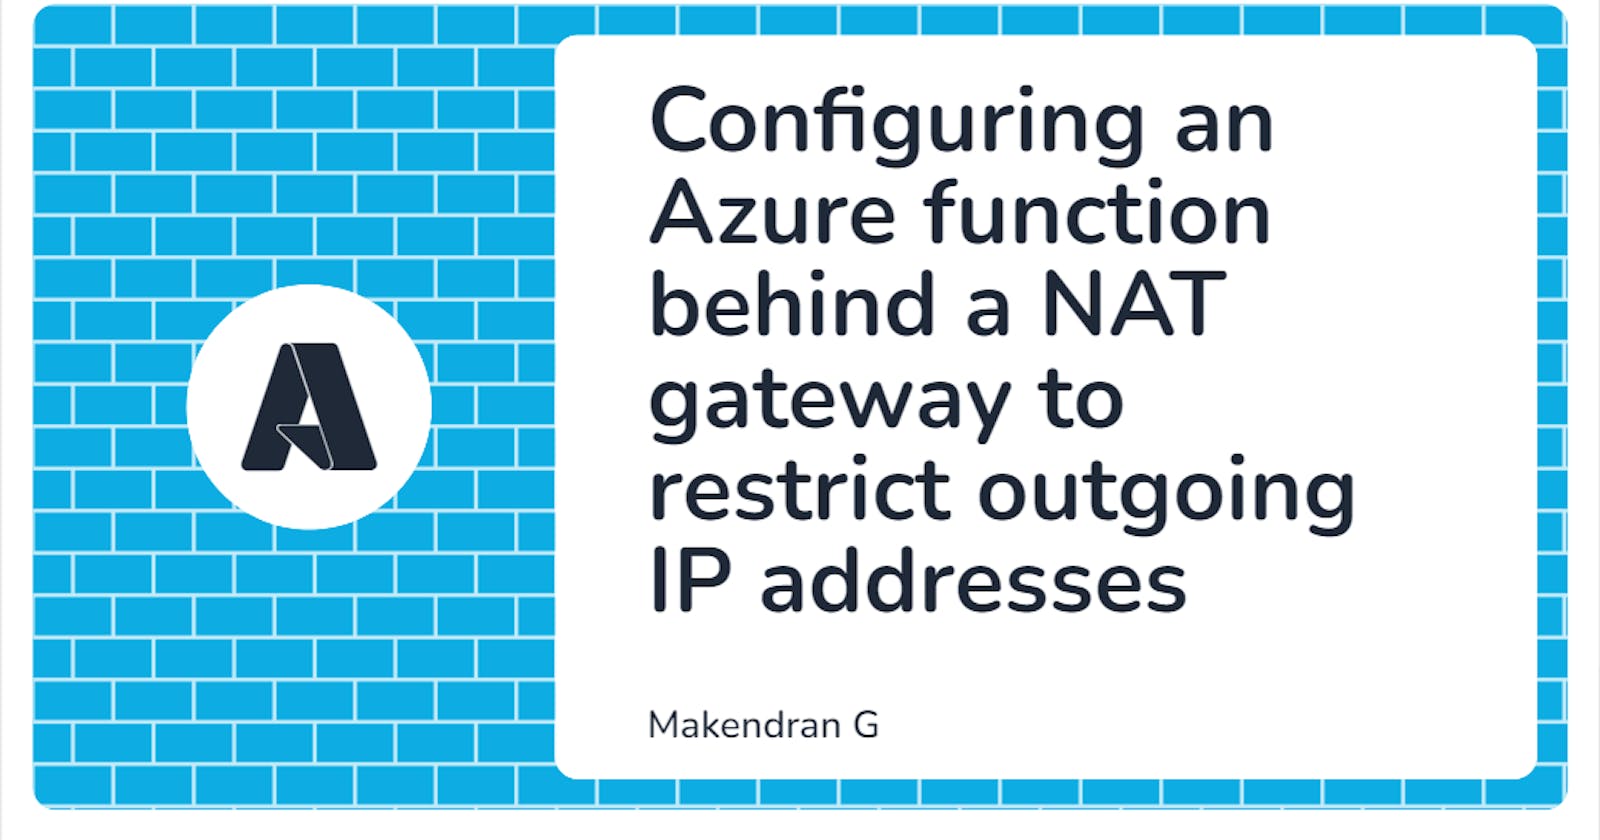 Configuring an Azure function behind a NAT gateway to restrict outgoing IP addresses